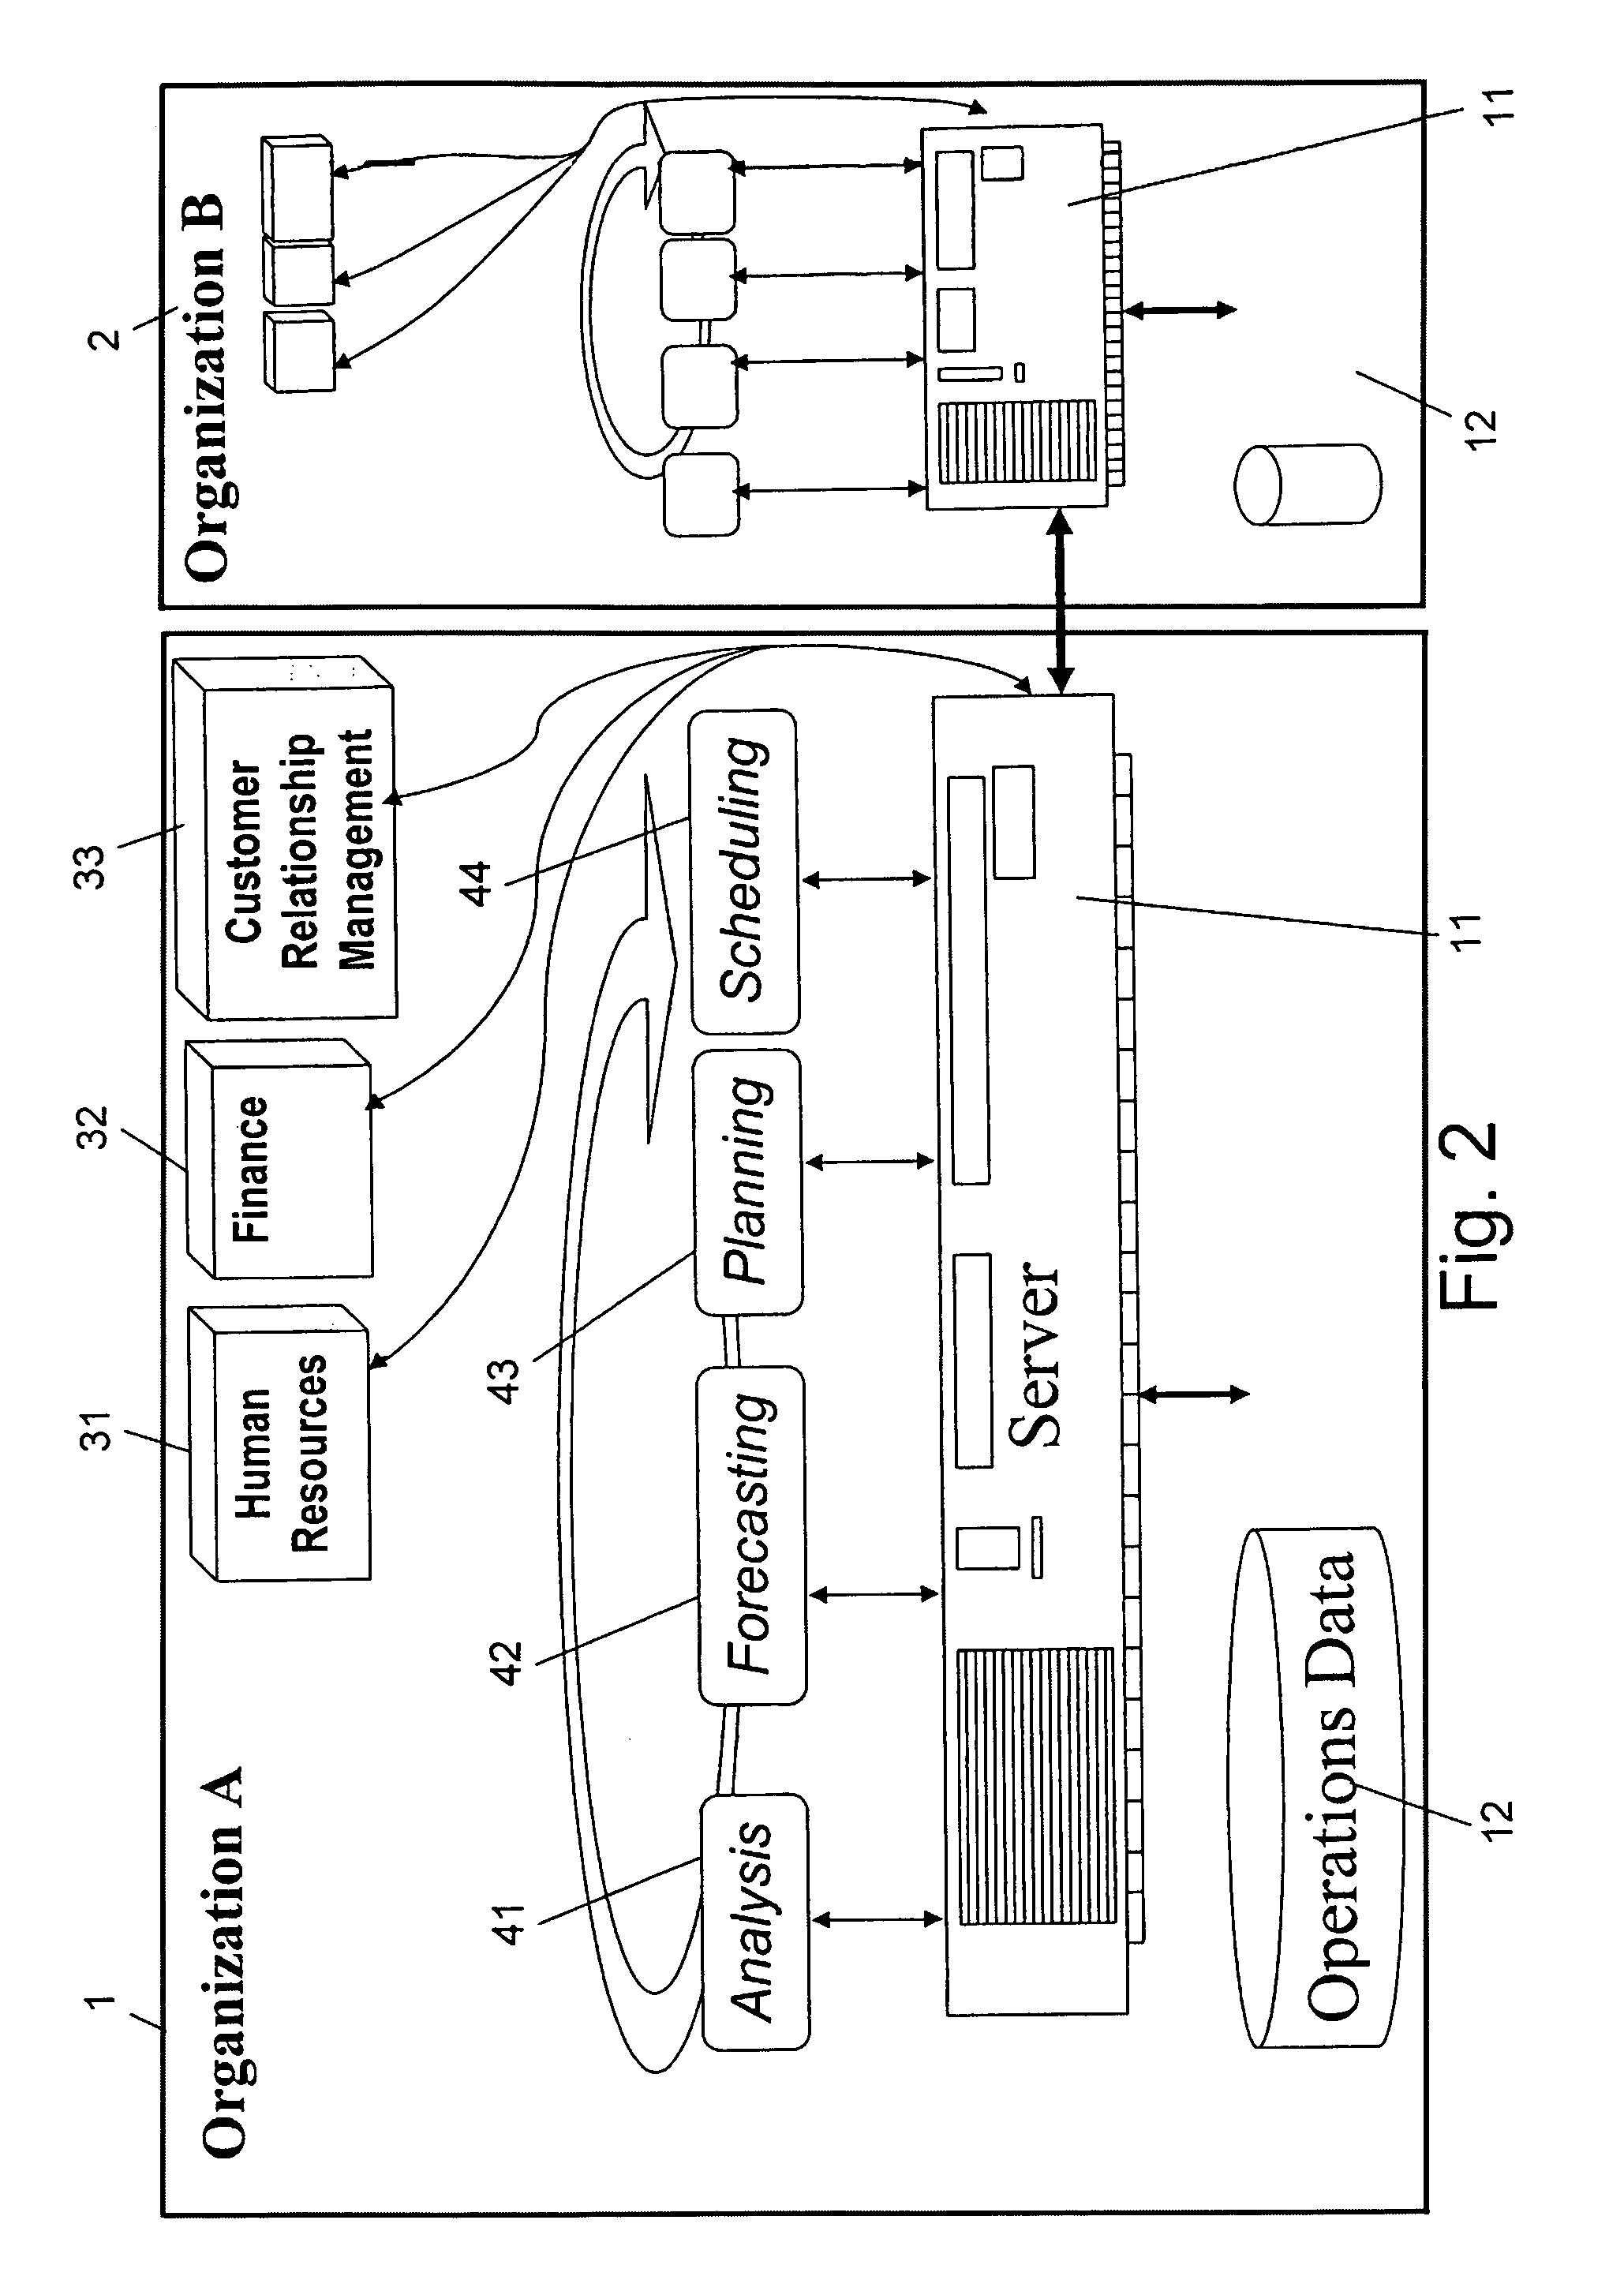 Method and system for assigning human resources to provide services